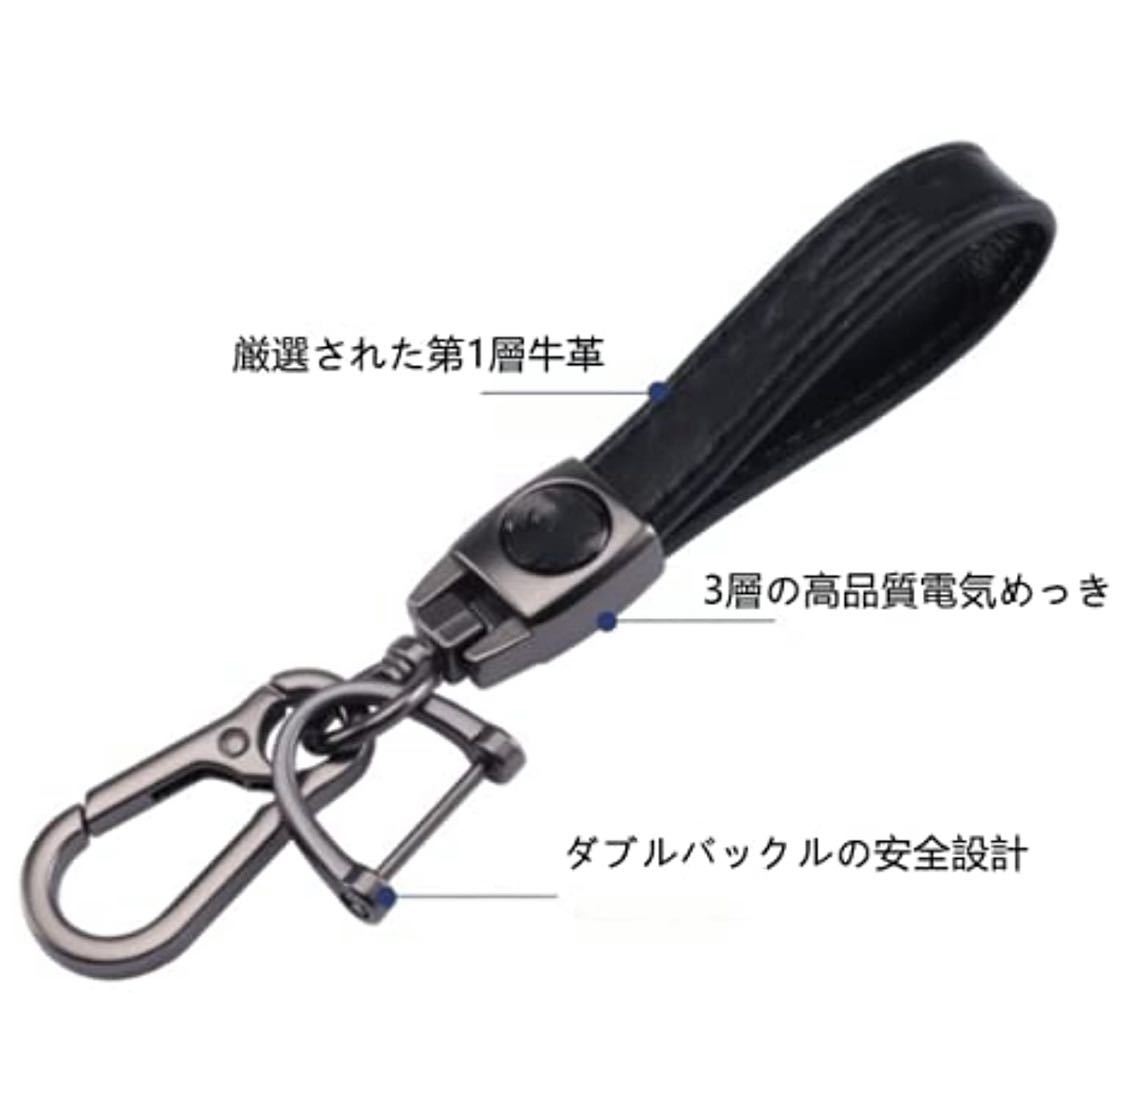  Benz key holder metal fittings high class cow leather made key ring accessory black color . silver color possible selection 